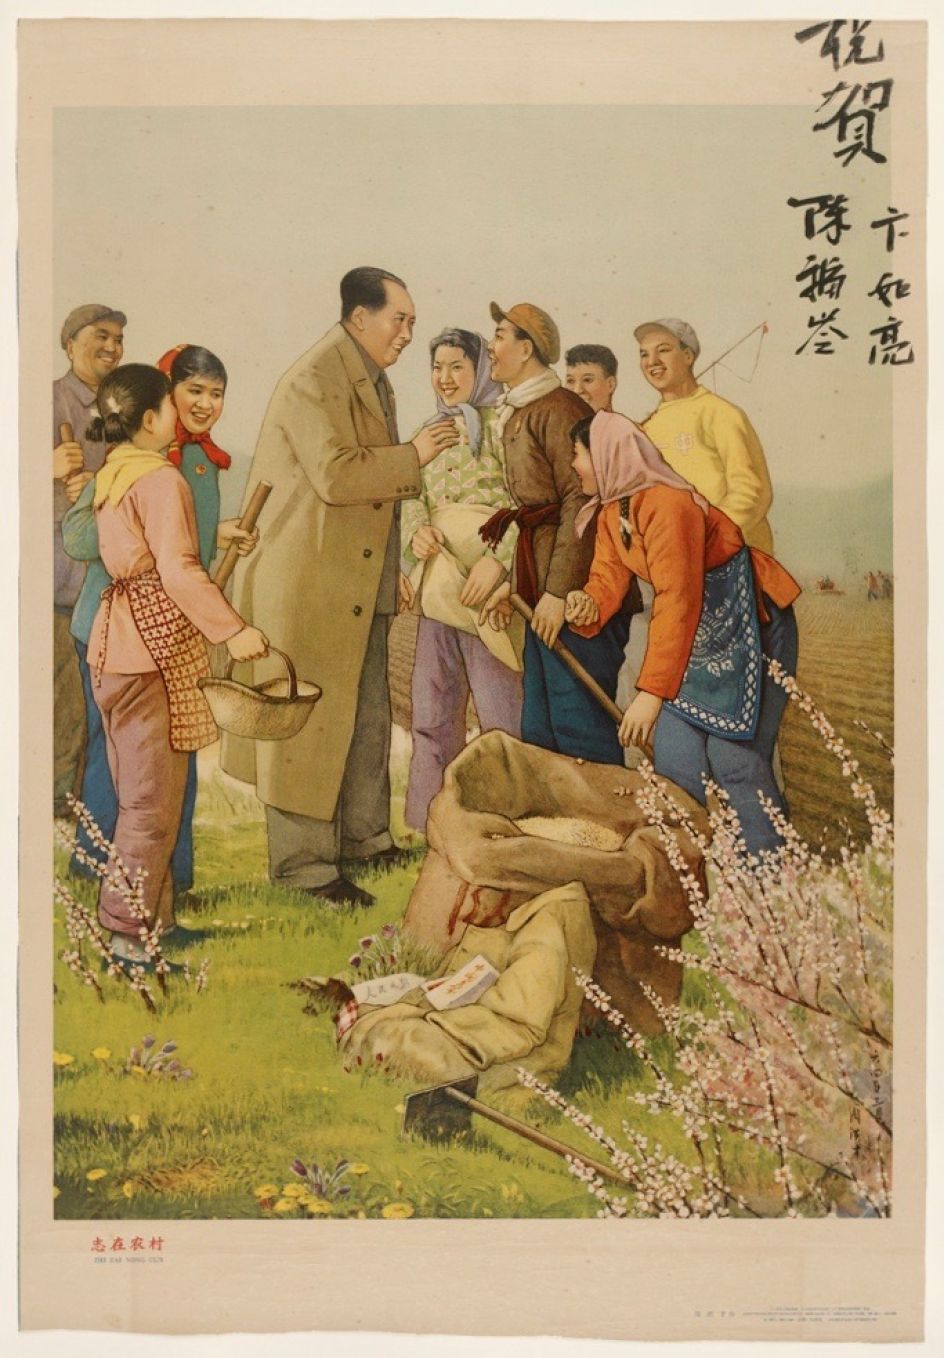 Hongcai Zhou Chairman Mao talking to farmers in a spring landscape 1964 Liaoning Fine Arts Publishing (est. 1945), (publisher) Xinhua Bookstore (est. 1937), (retailer) Lithograph; Calligraphy in ink © Ashmolean Museum, University of Oxford